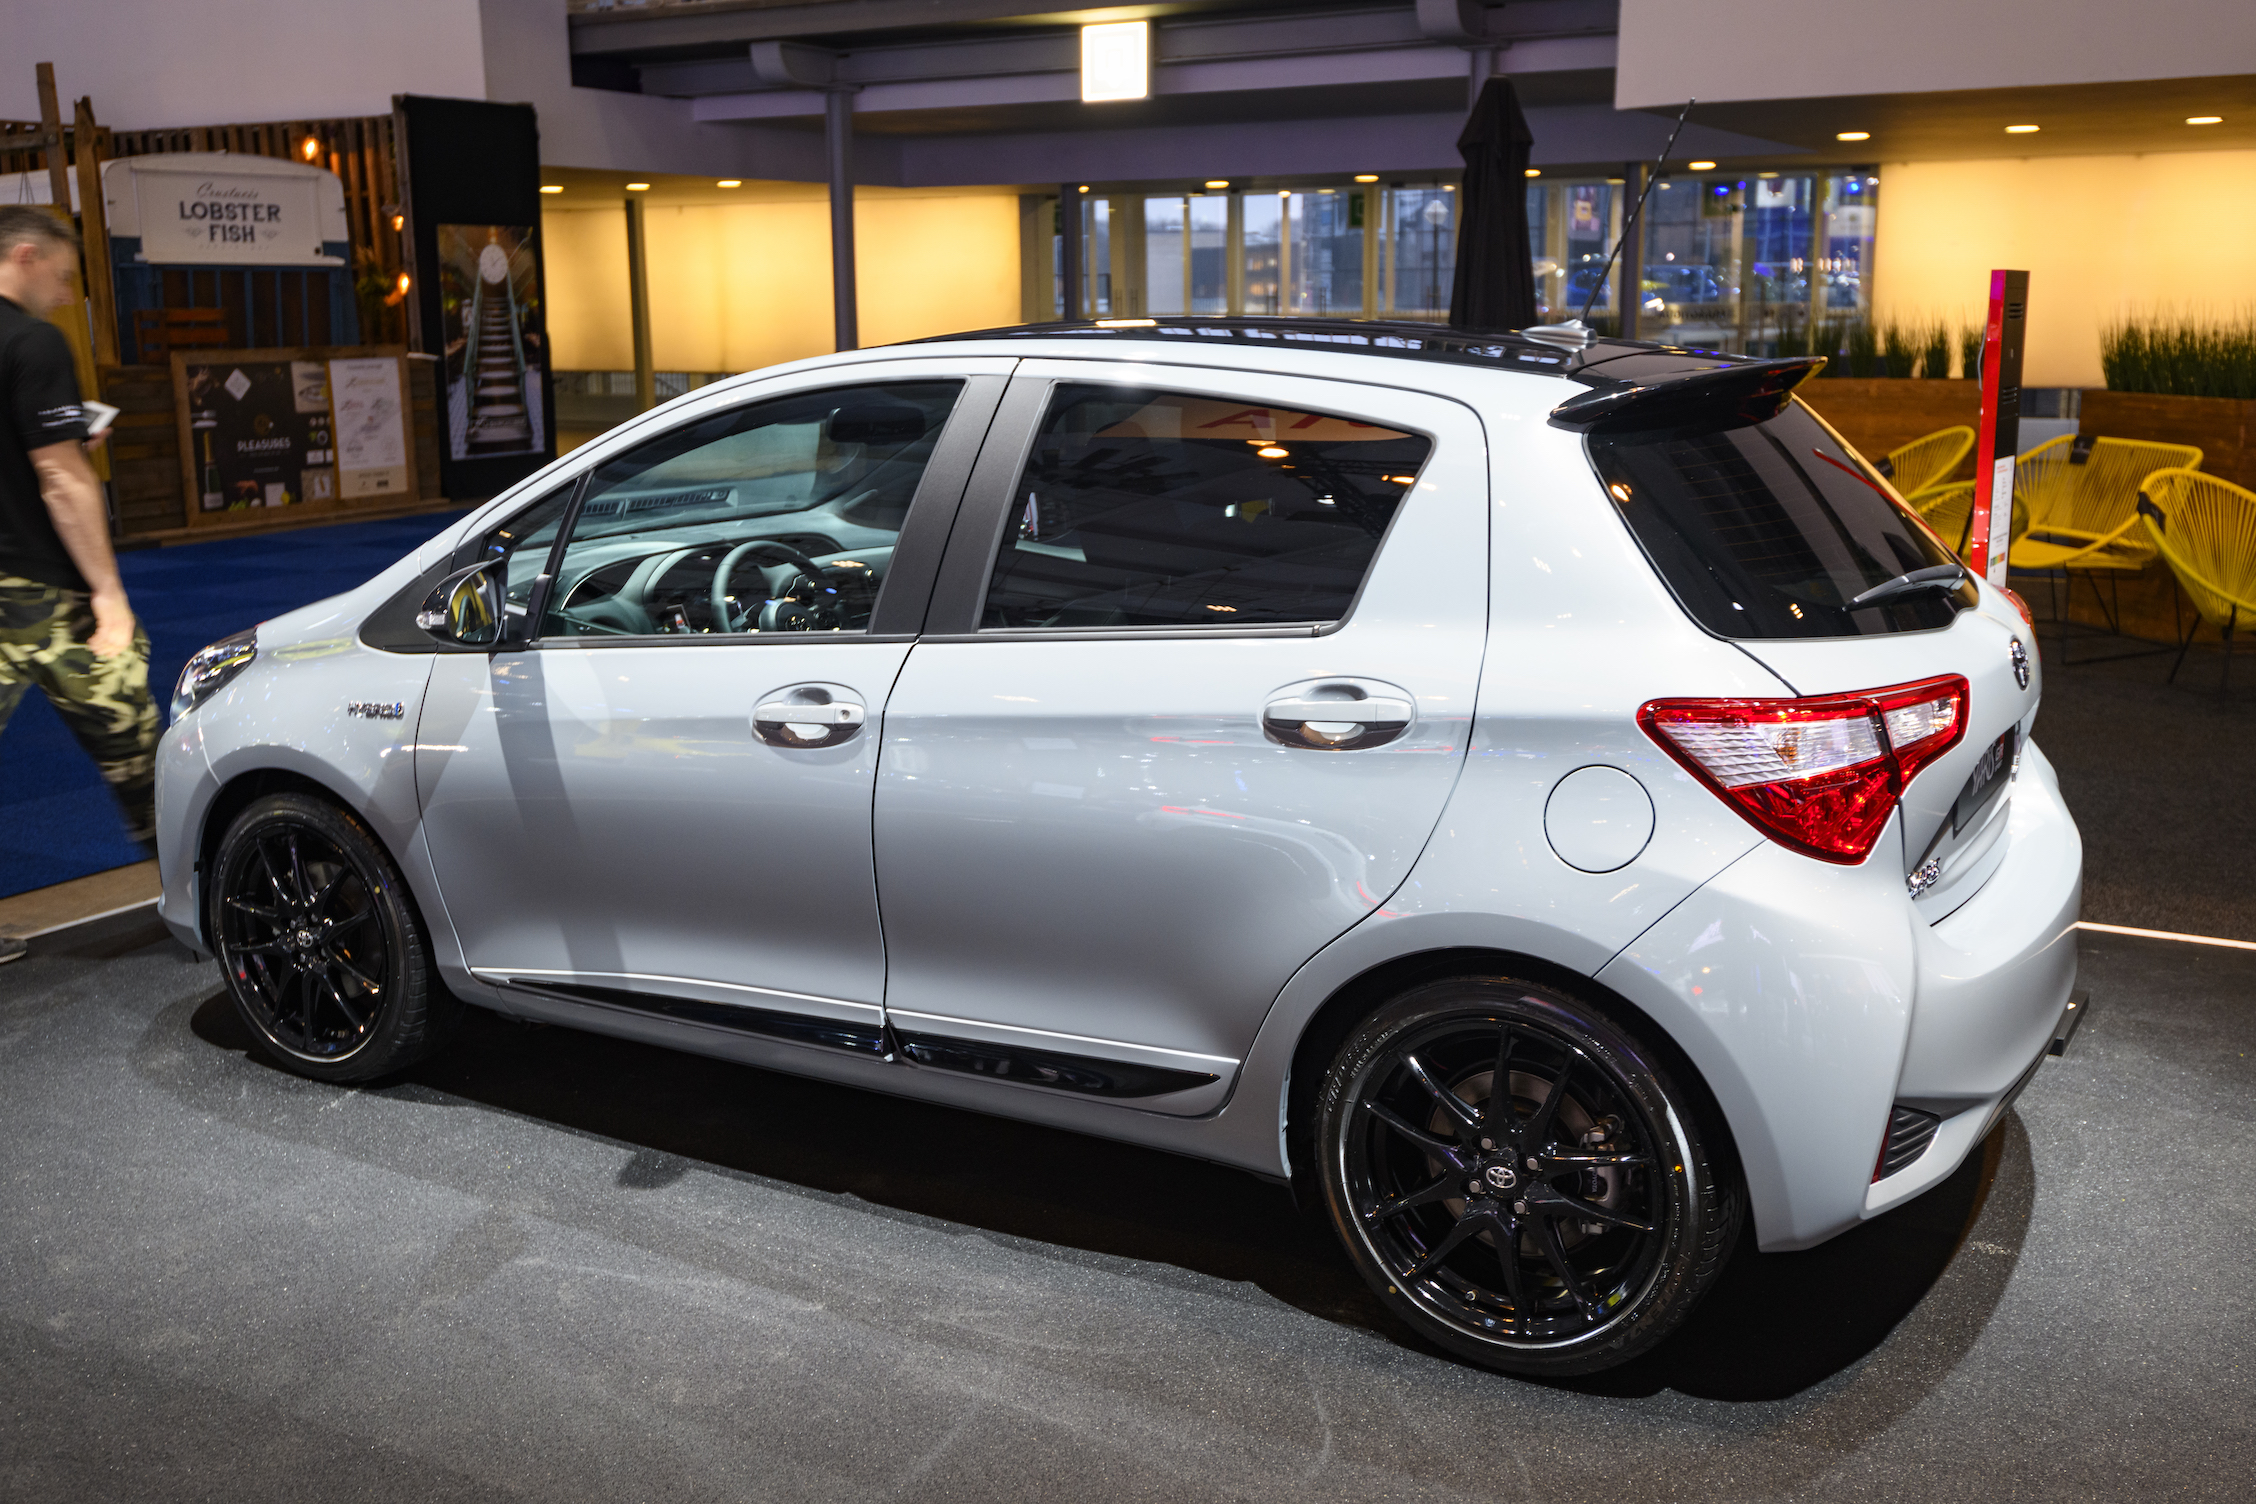 Toyota Yaris GR hybrid compact city car on display at Brussels Expo